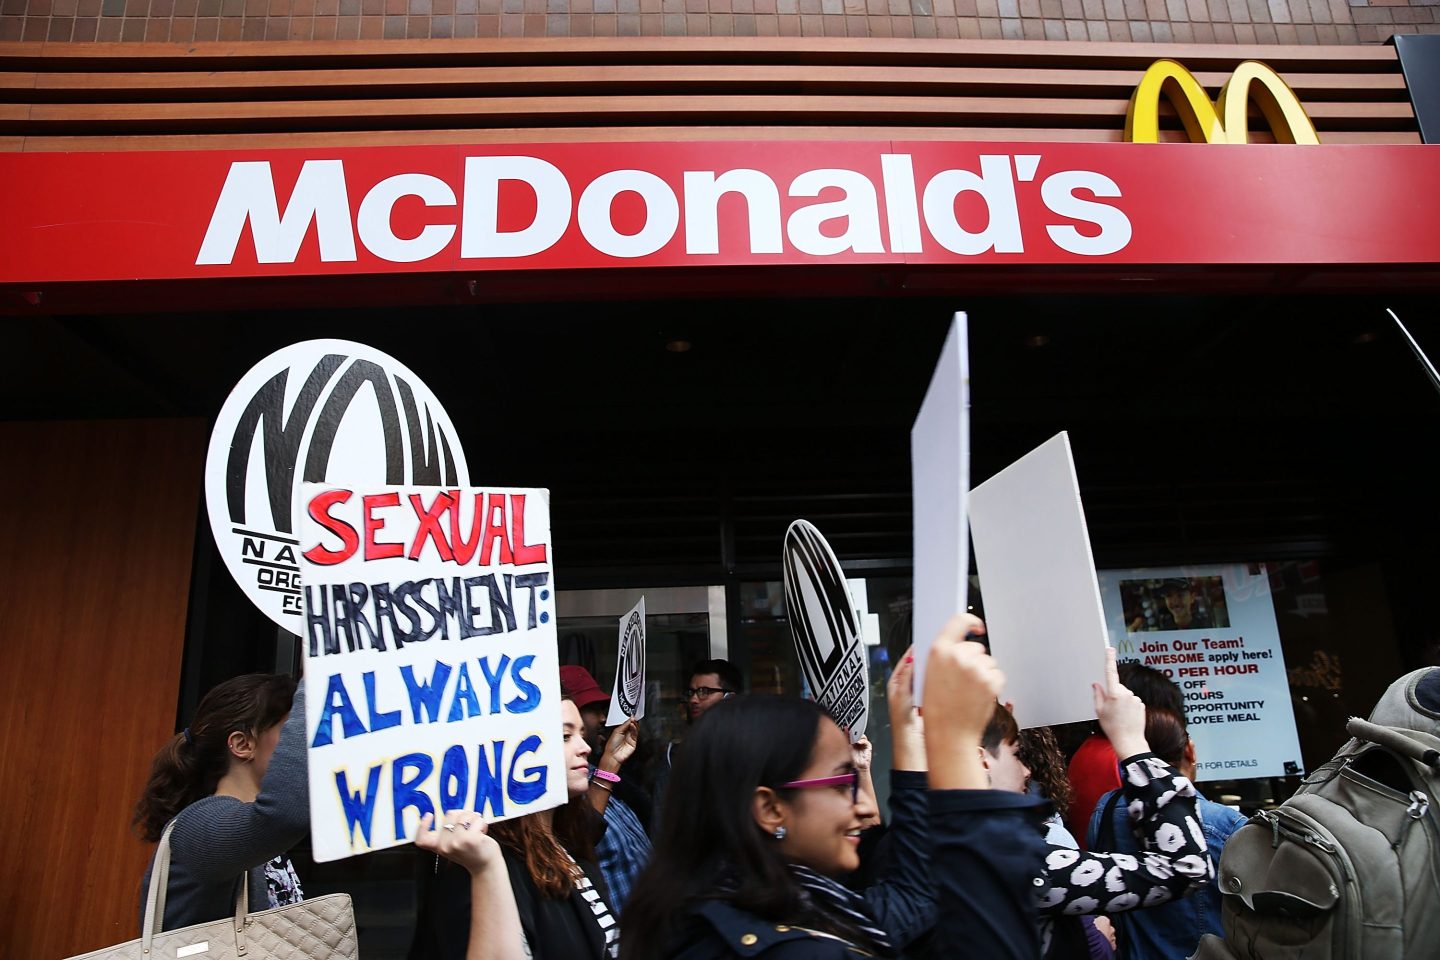 Protesters demonstrate outside of a McDonald's restaurant near Times Square